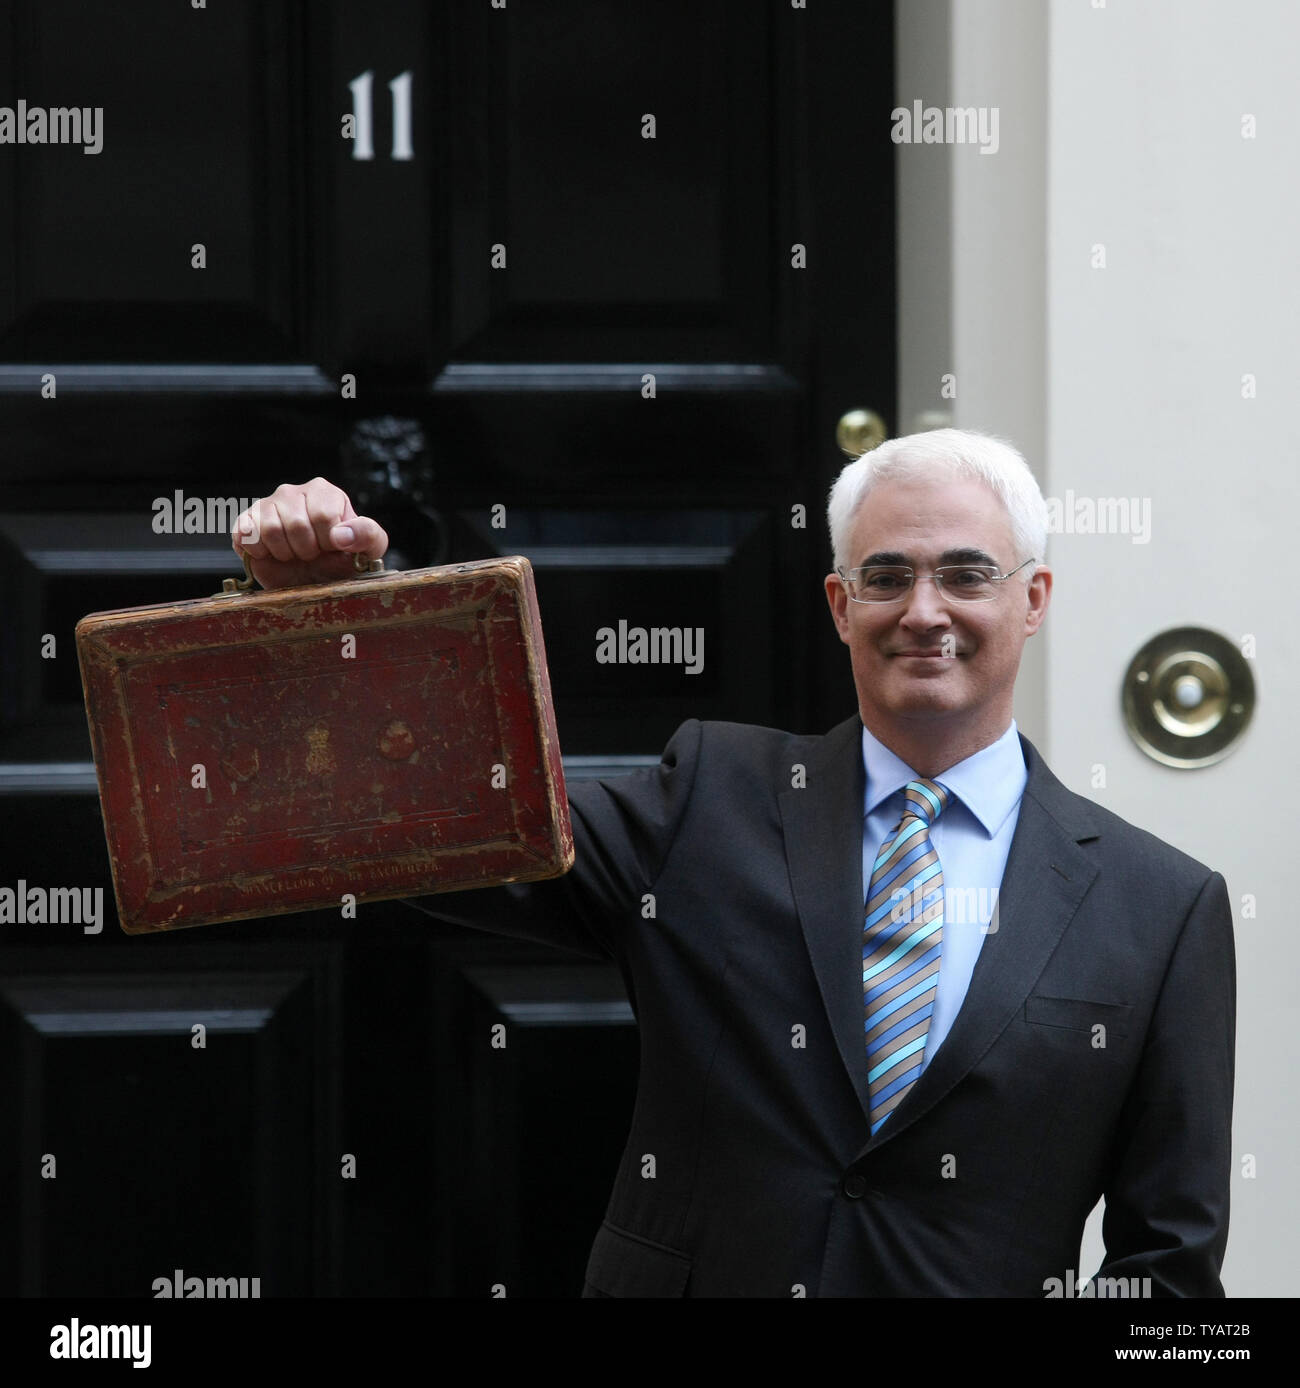 Britain's Chancellor of the Exchequer Alastair Darling holds Disraeli's original budget box outside number 11 Downing St in London on April 22 2009 in London.The Chancellor is expected to reveal the depth of the UK recession to parliamentary colleagues this afternoon. (UPI Photo/Hugo Philpott) Stock Photo